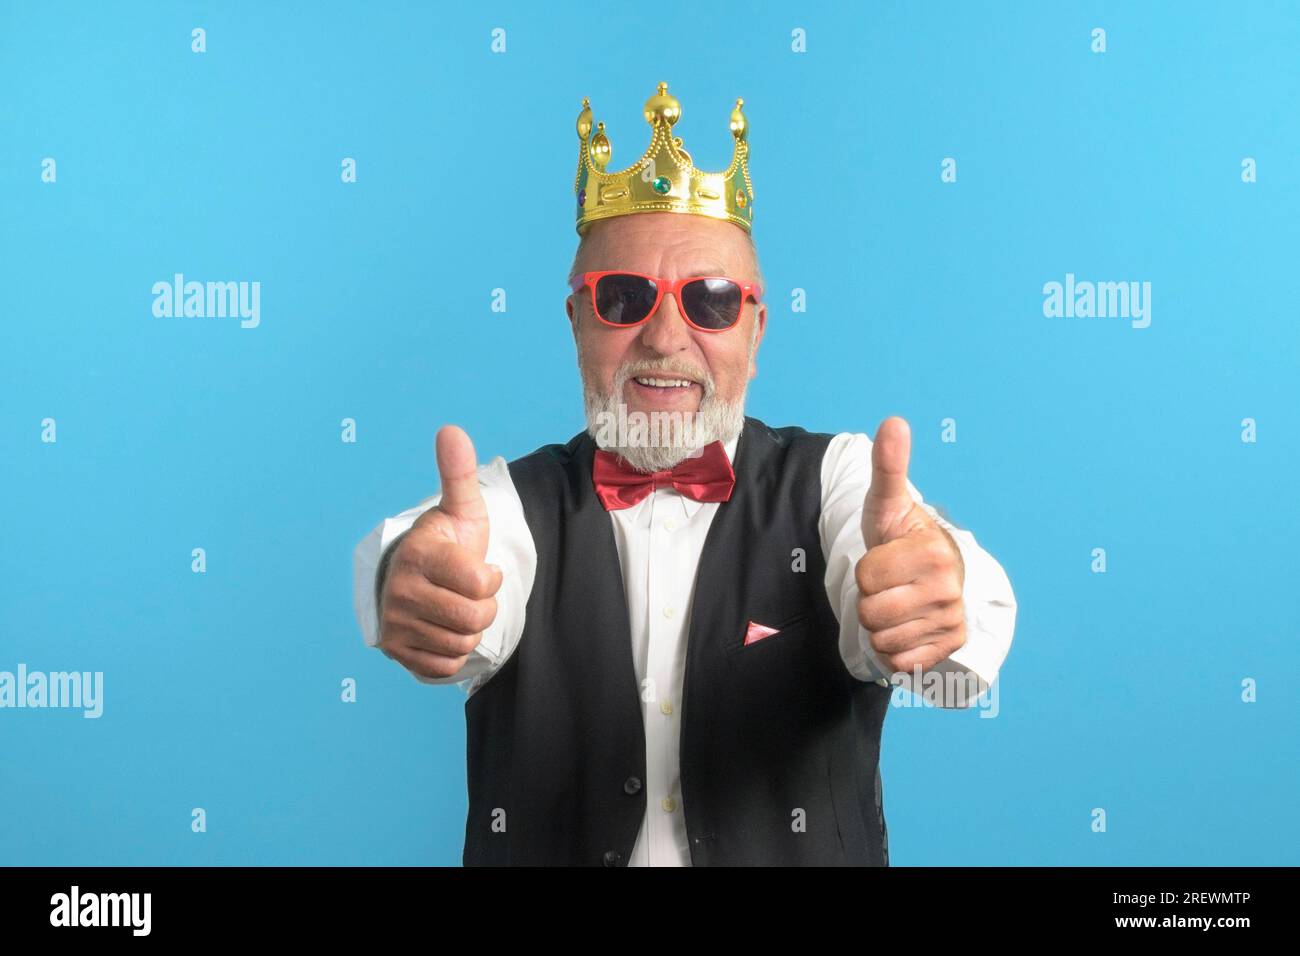 Funny old man in a festive suit on a blue background with a bow tie and a golden crown on his head Stock Photo